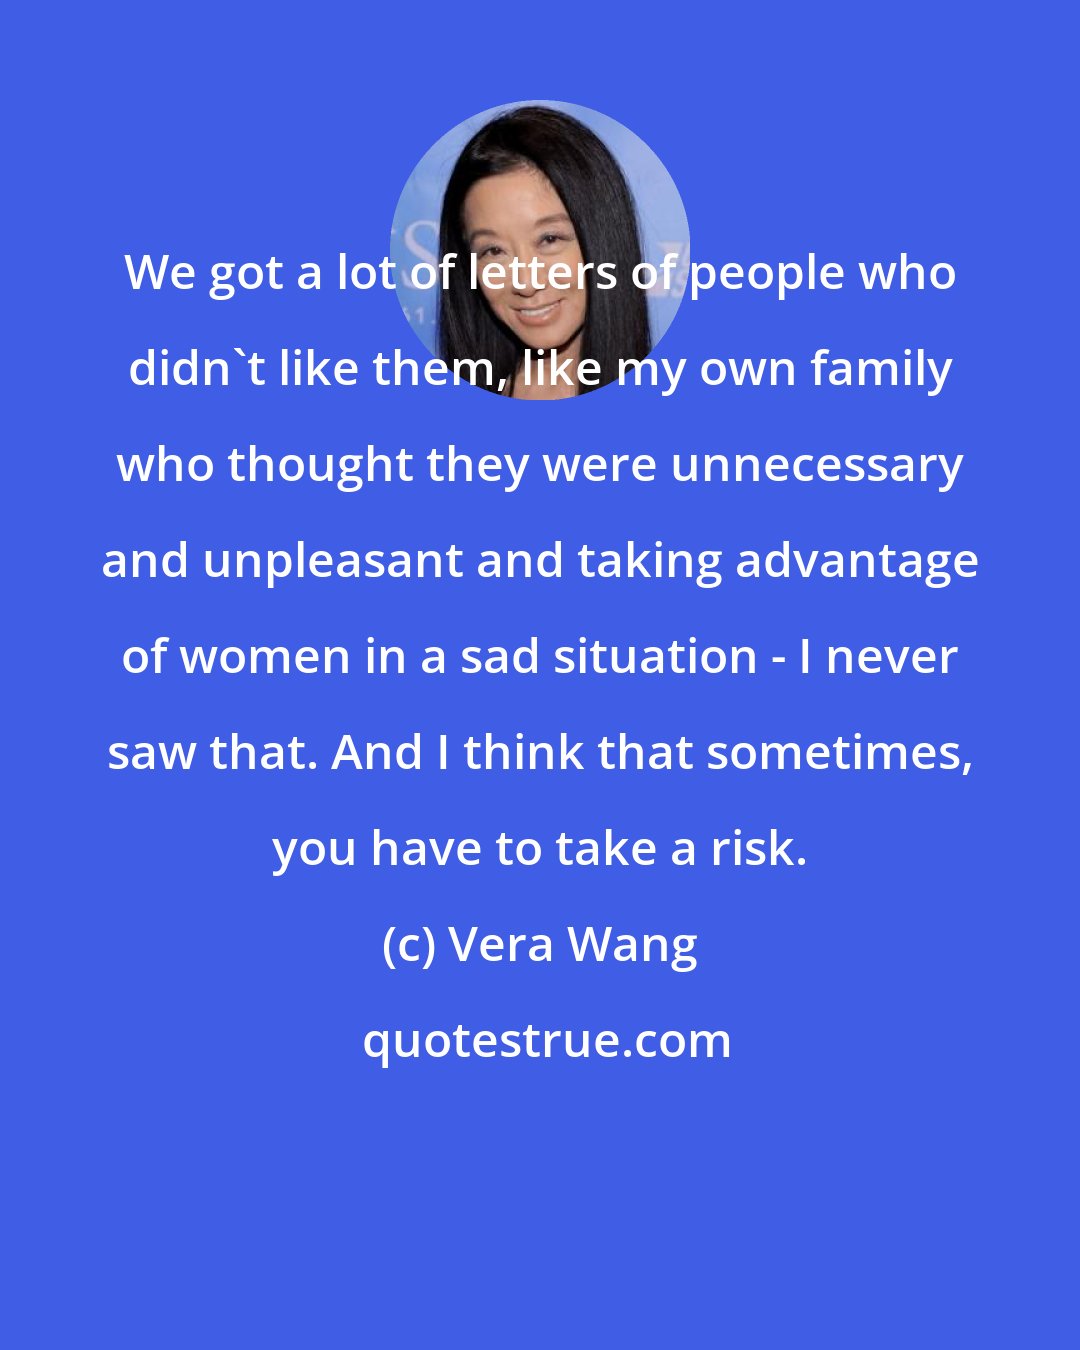 Vera Wang: We got a lot of letters of people who didn't like them, like my own family who thought they were unnecessary and unpleasant and taking advantage of women in a sad situation - I never saw that. And I think that sometimes, you have to take a risk.